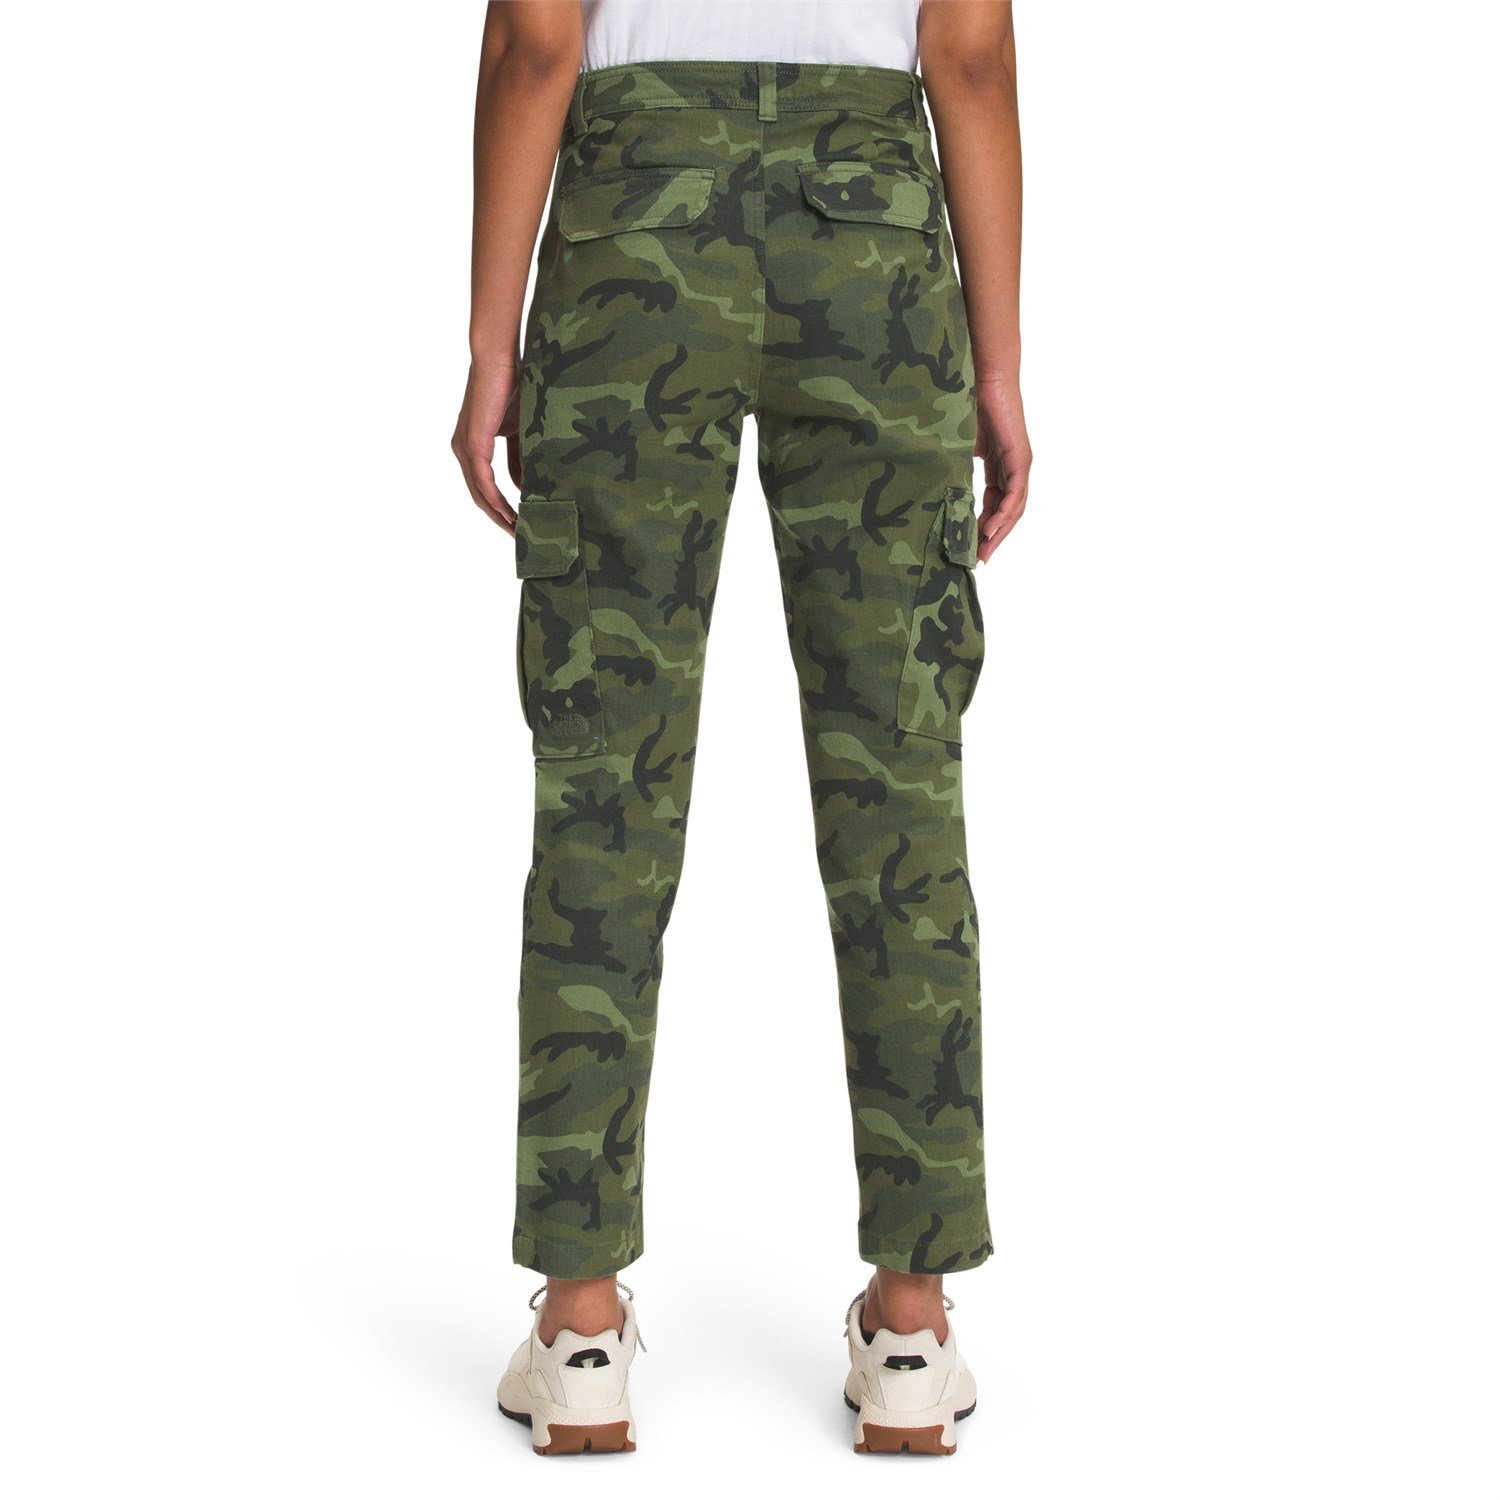 Buy Elitify Women Army Print Multicolor Cargo Pant (Size-32) at Amazon.in